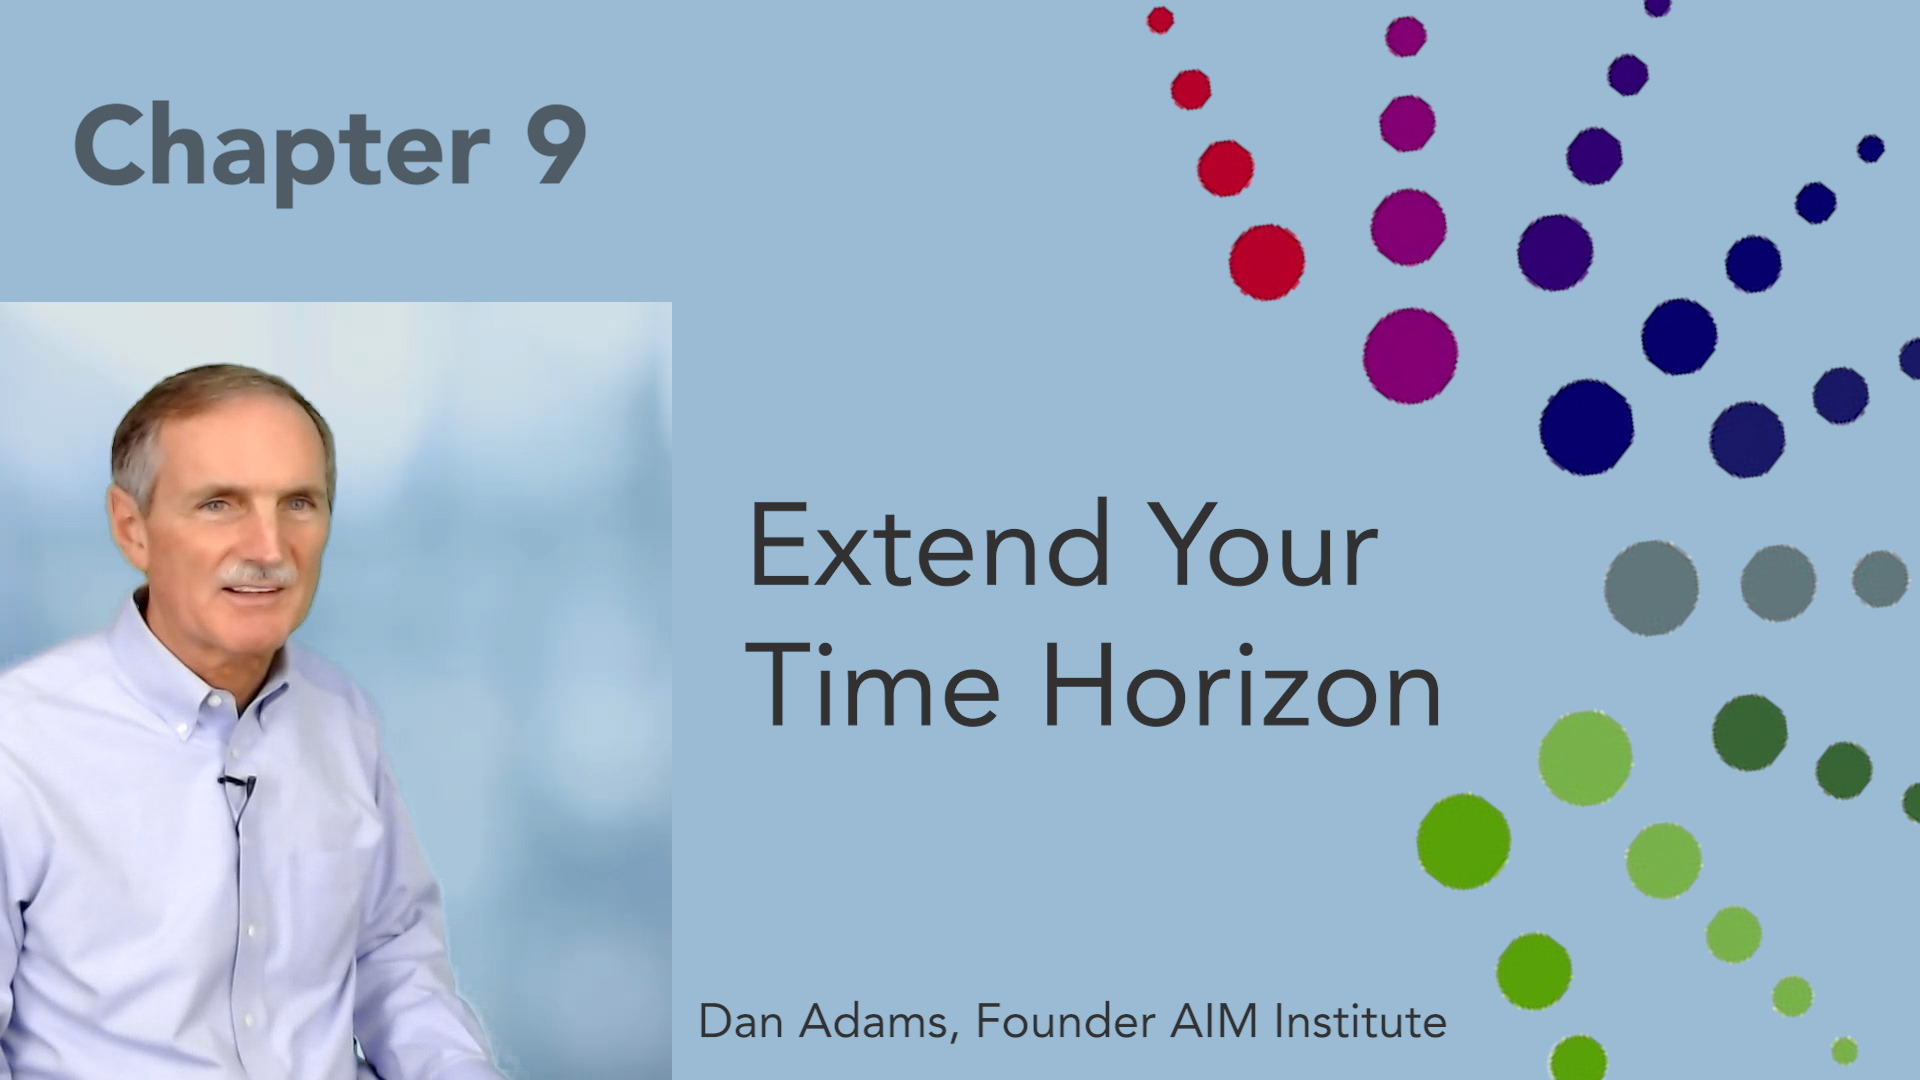 Featured image for “Extend Your Time Horizon”